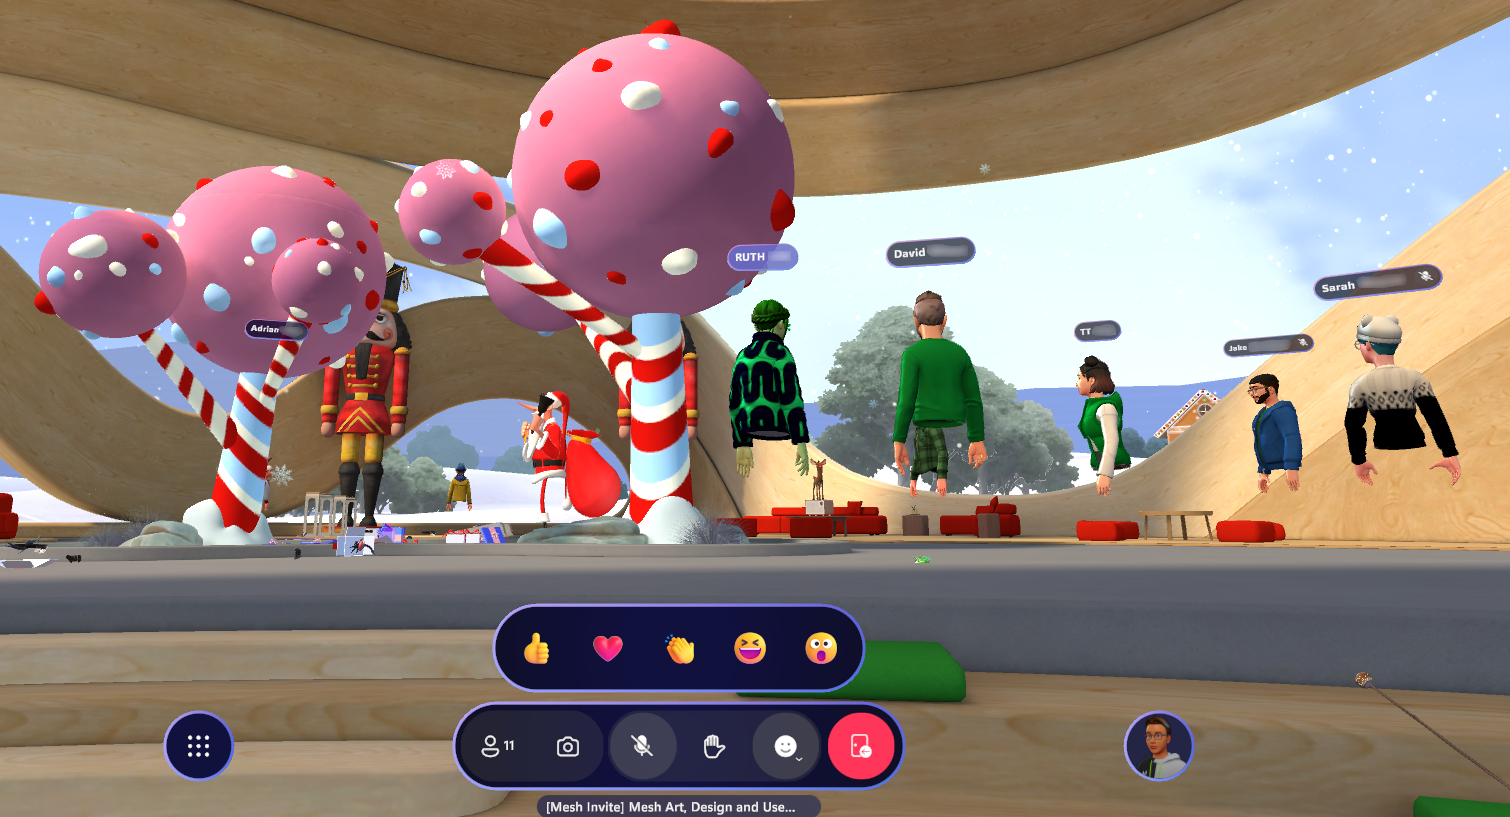 A screenshot of avatars spawned in a Mesh experience.